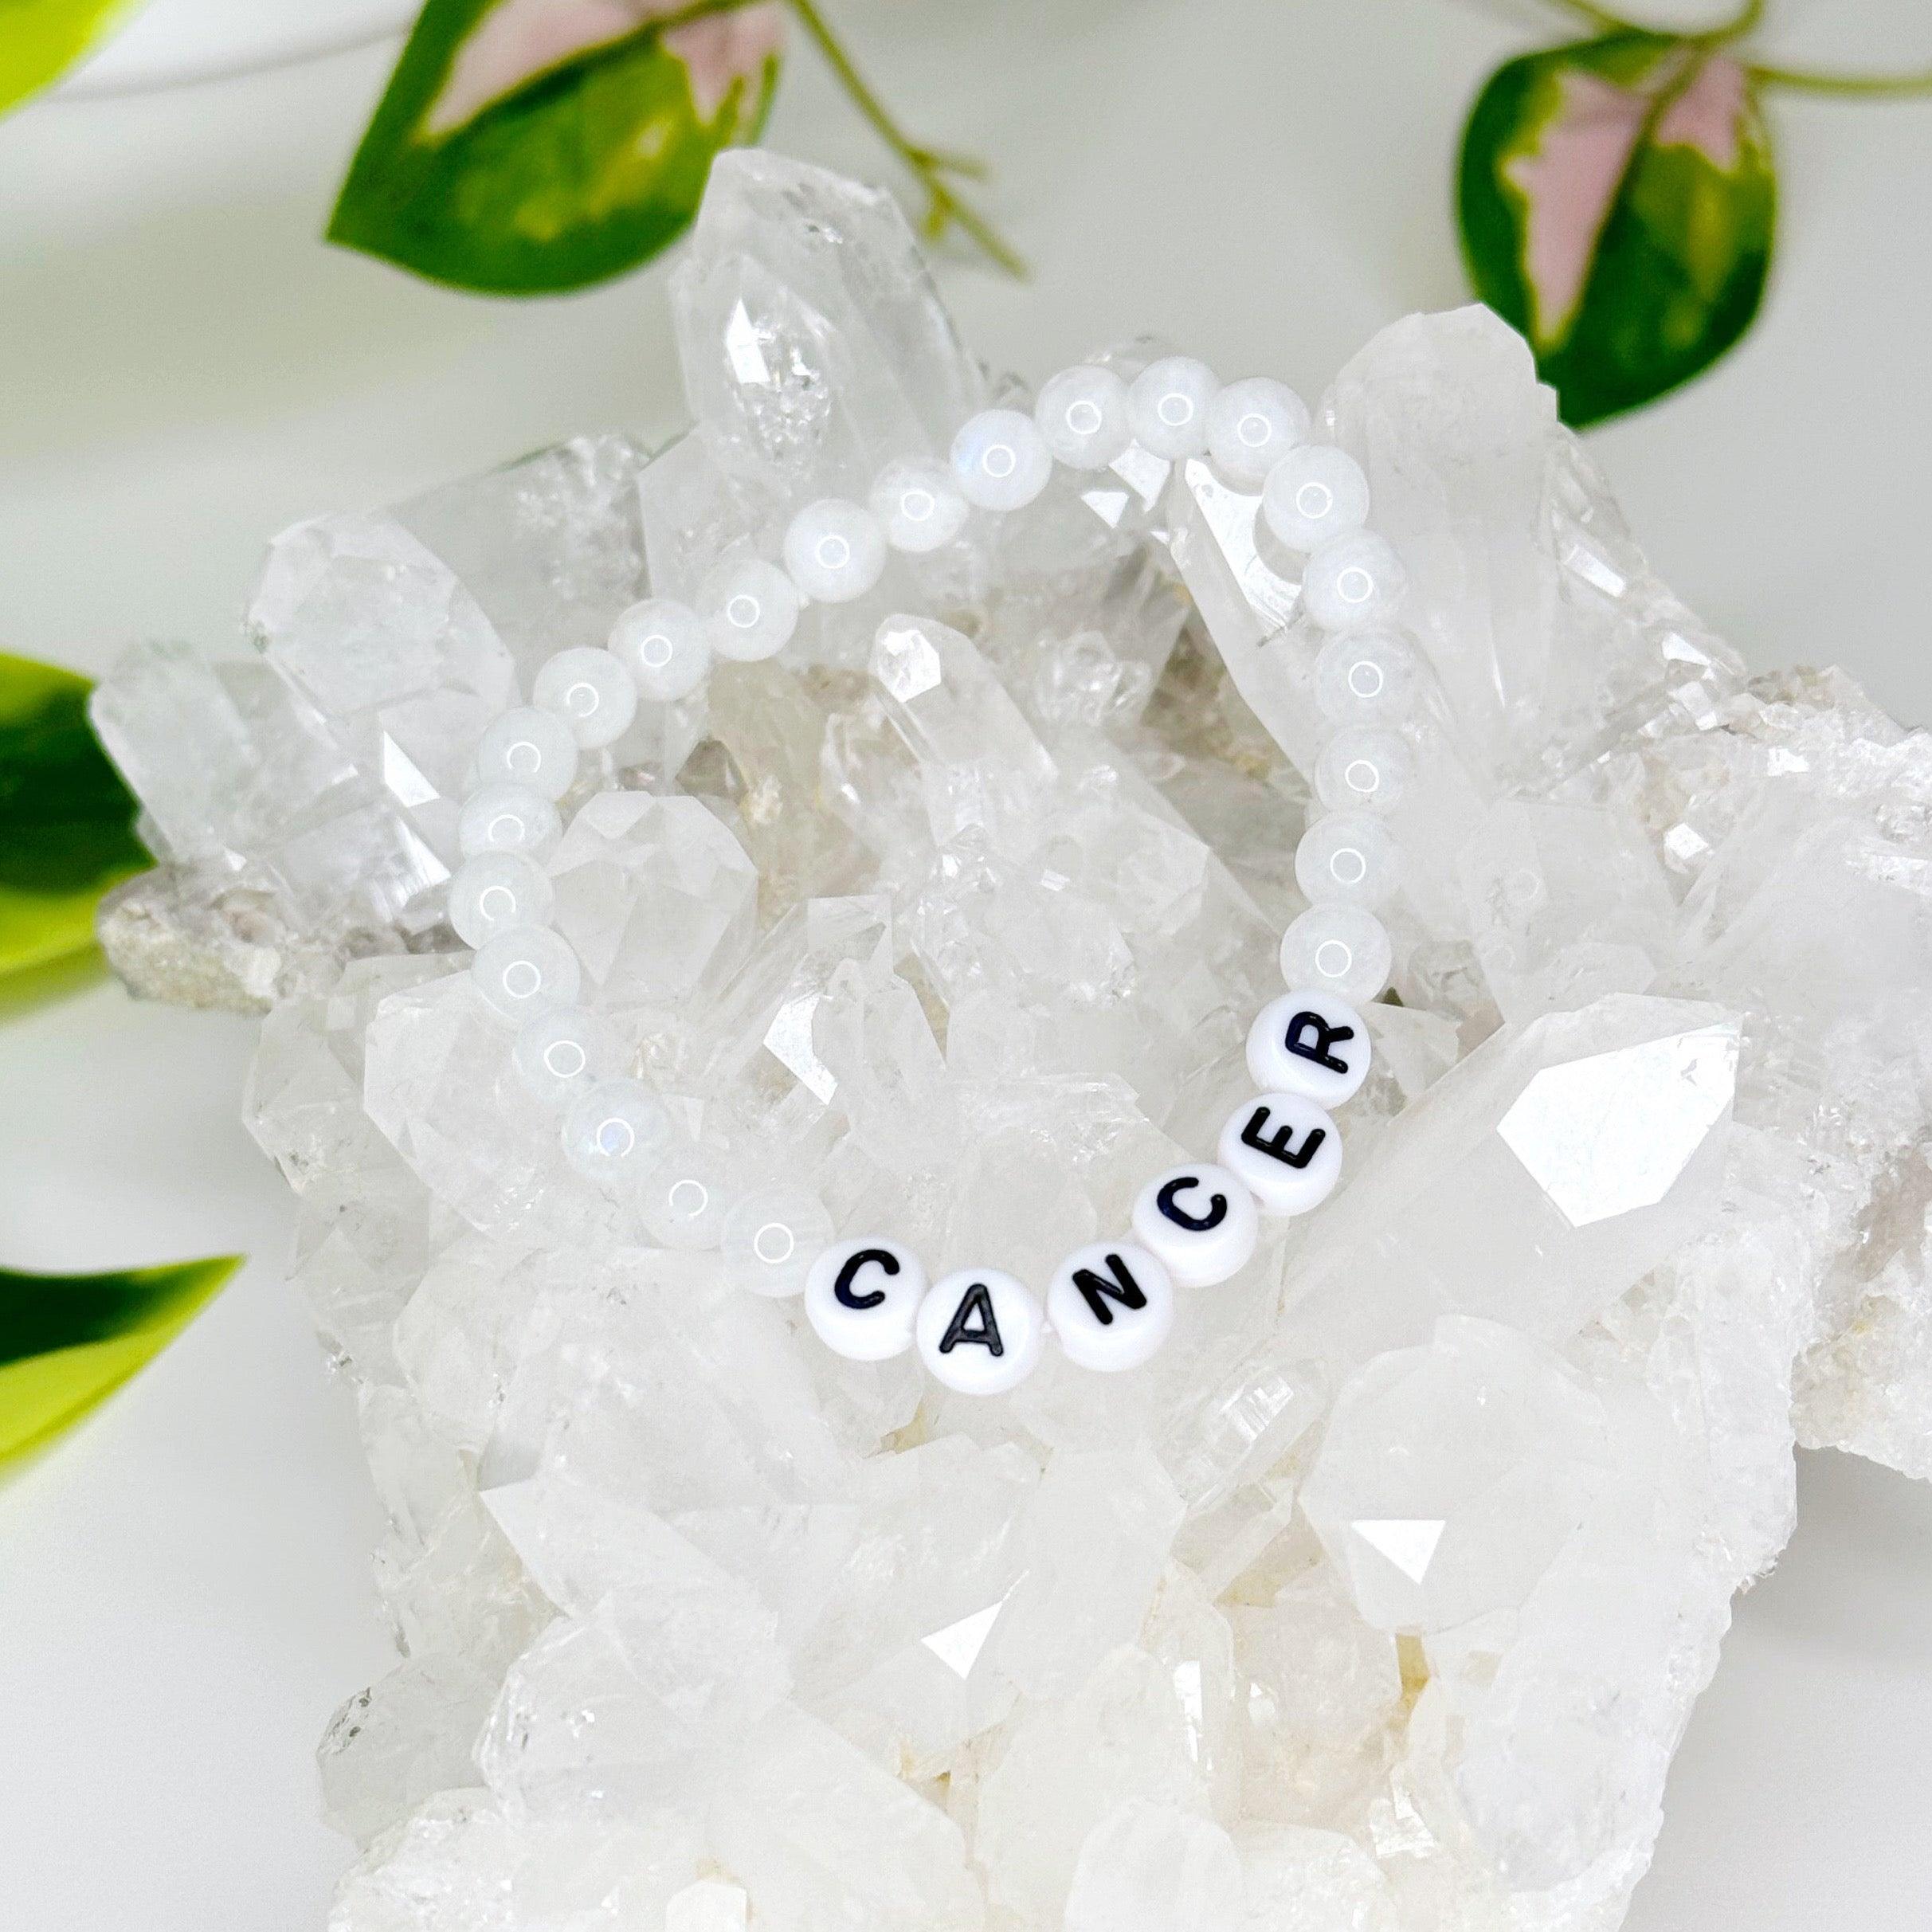 &#39;CANCER&#39; MOONSTONE 6mm - HANDMADE CRYSTAL BRACELET - 6mm, air, astro collection, bracelet, cancer, cancer season, cancer stack, clear/white, crystal bracelet, fertility, handmade bracelet, jewelry, moonstone, recently added, water, Wearable, white - The Mineral Maven